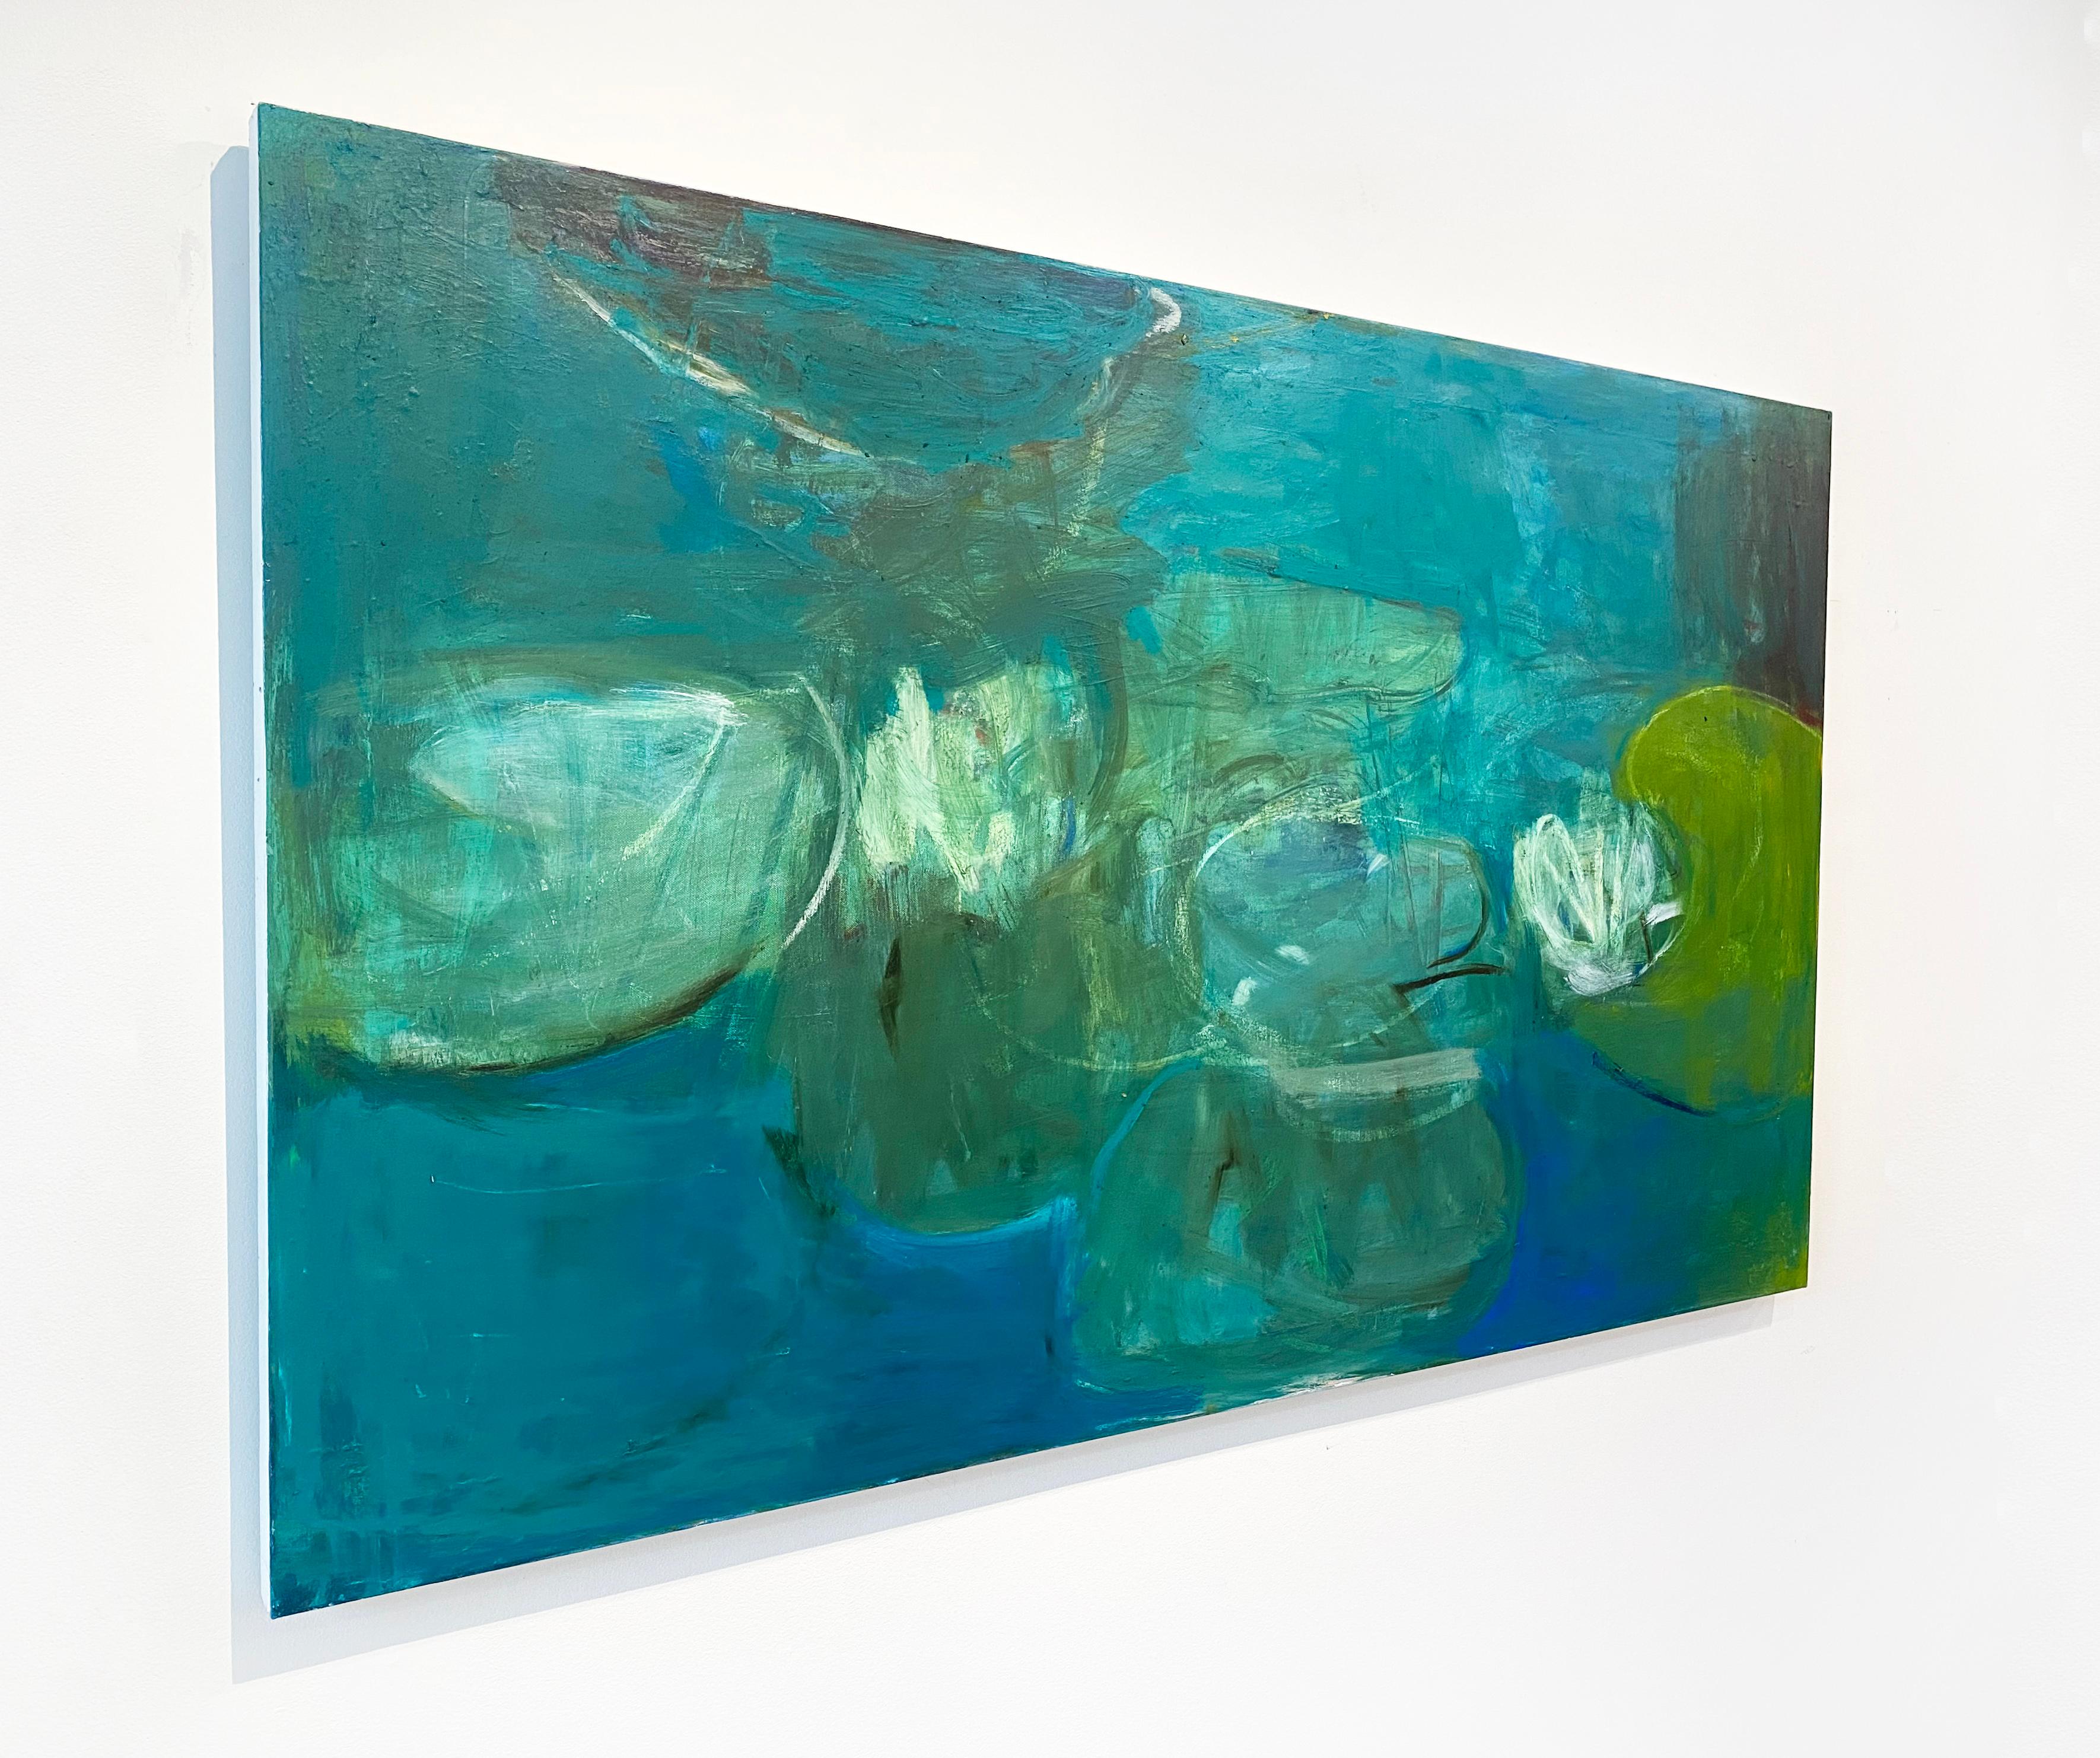 'Untitled # 400' by New York City based, French artist Sandrine Kern. 2022. Oil and cold wax on canvas, 36 x 60 in. This abstracted landscape painting features a pond and water lily scene in deep colors of blue, green, white, and black. 

Sandrine